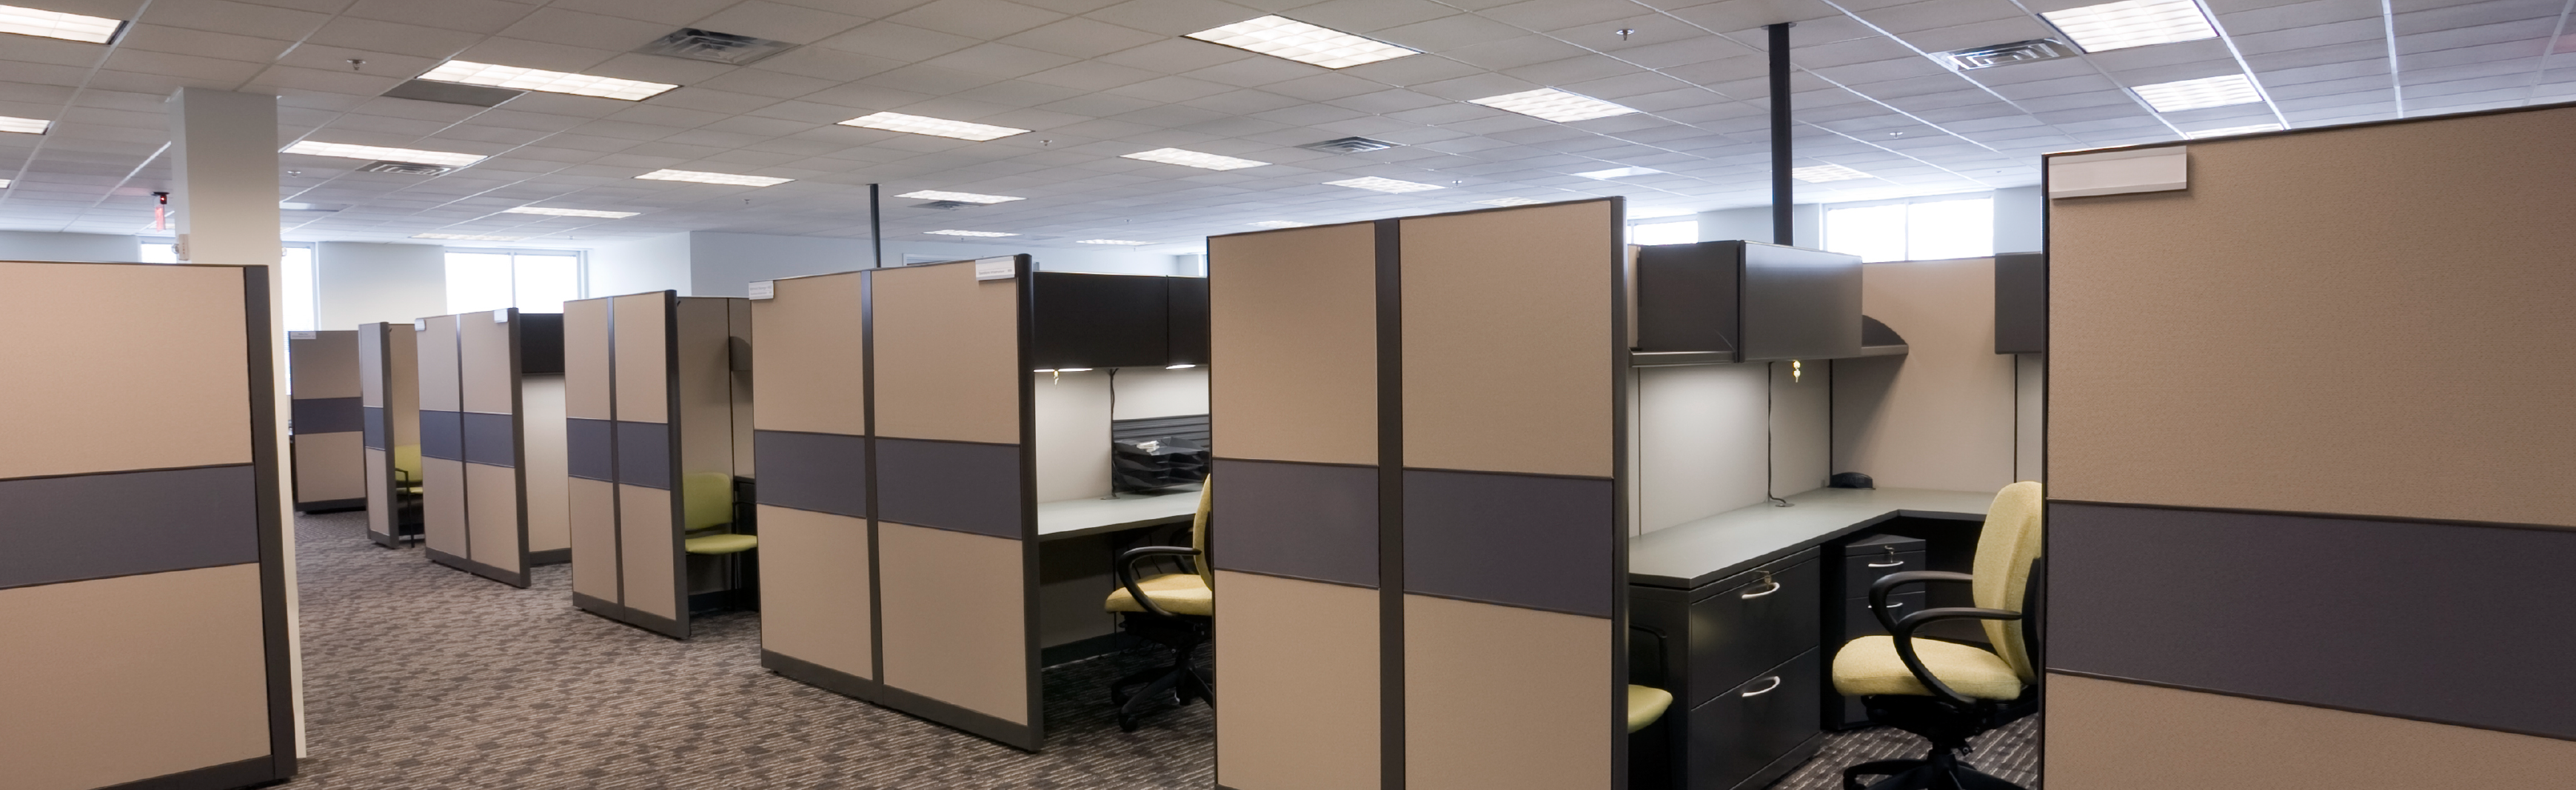 cubicles in a workplace